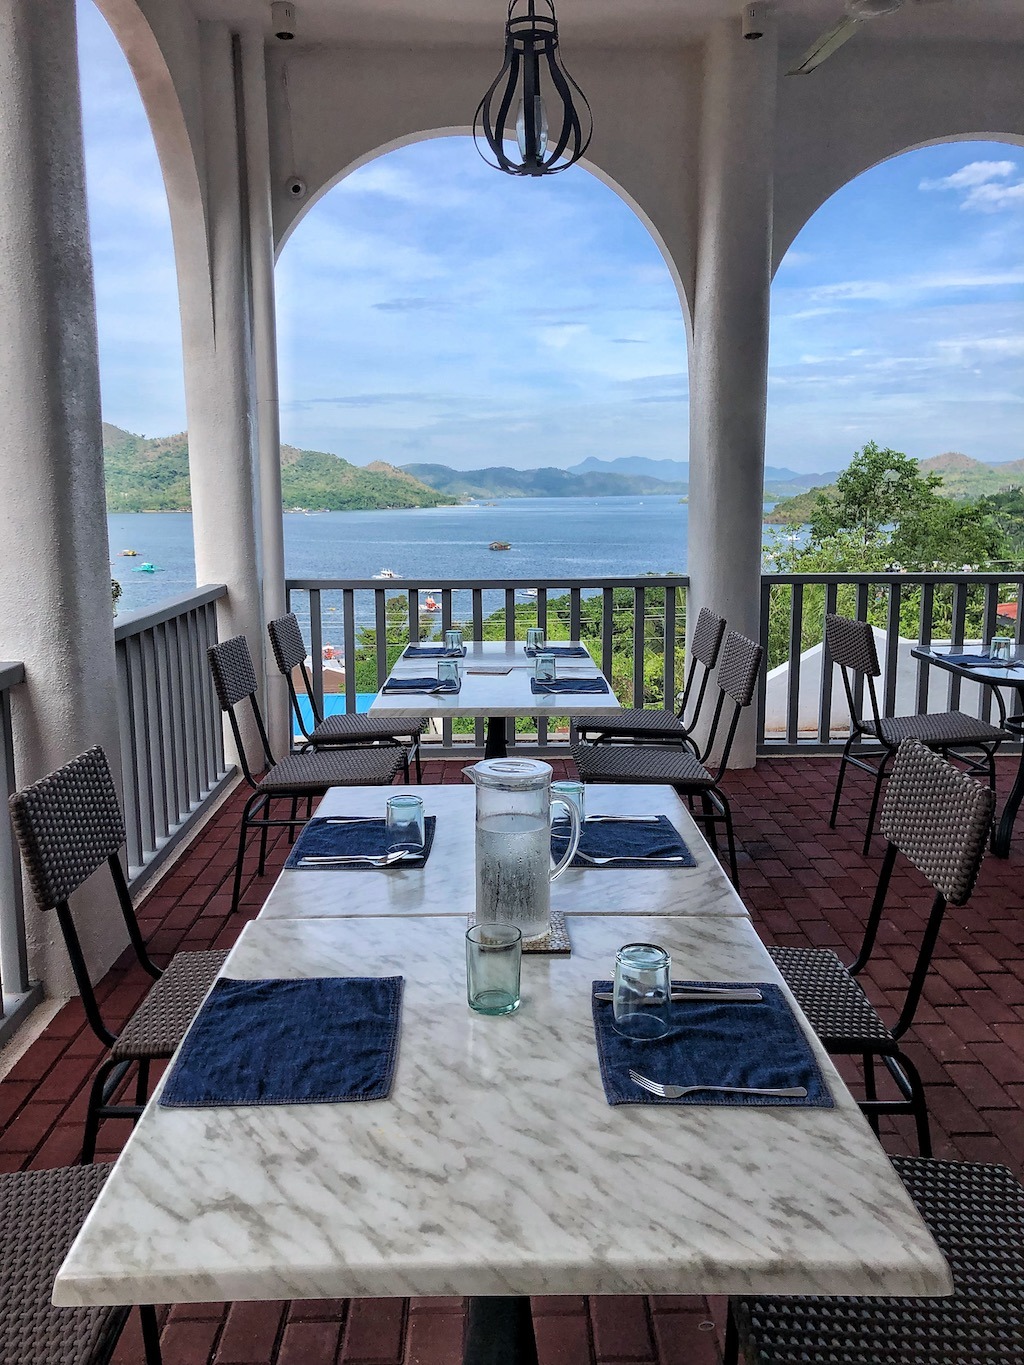 Hostel Recommendation While Travelling to Coron – Hop Hostel Restaurant View